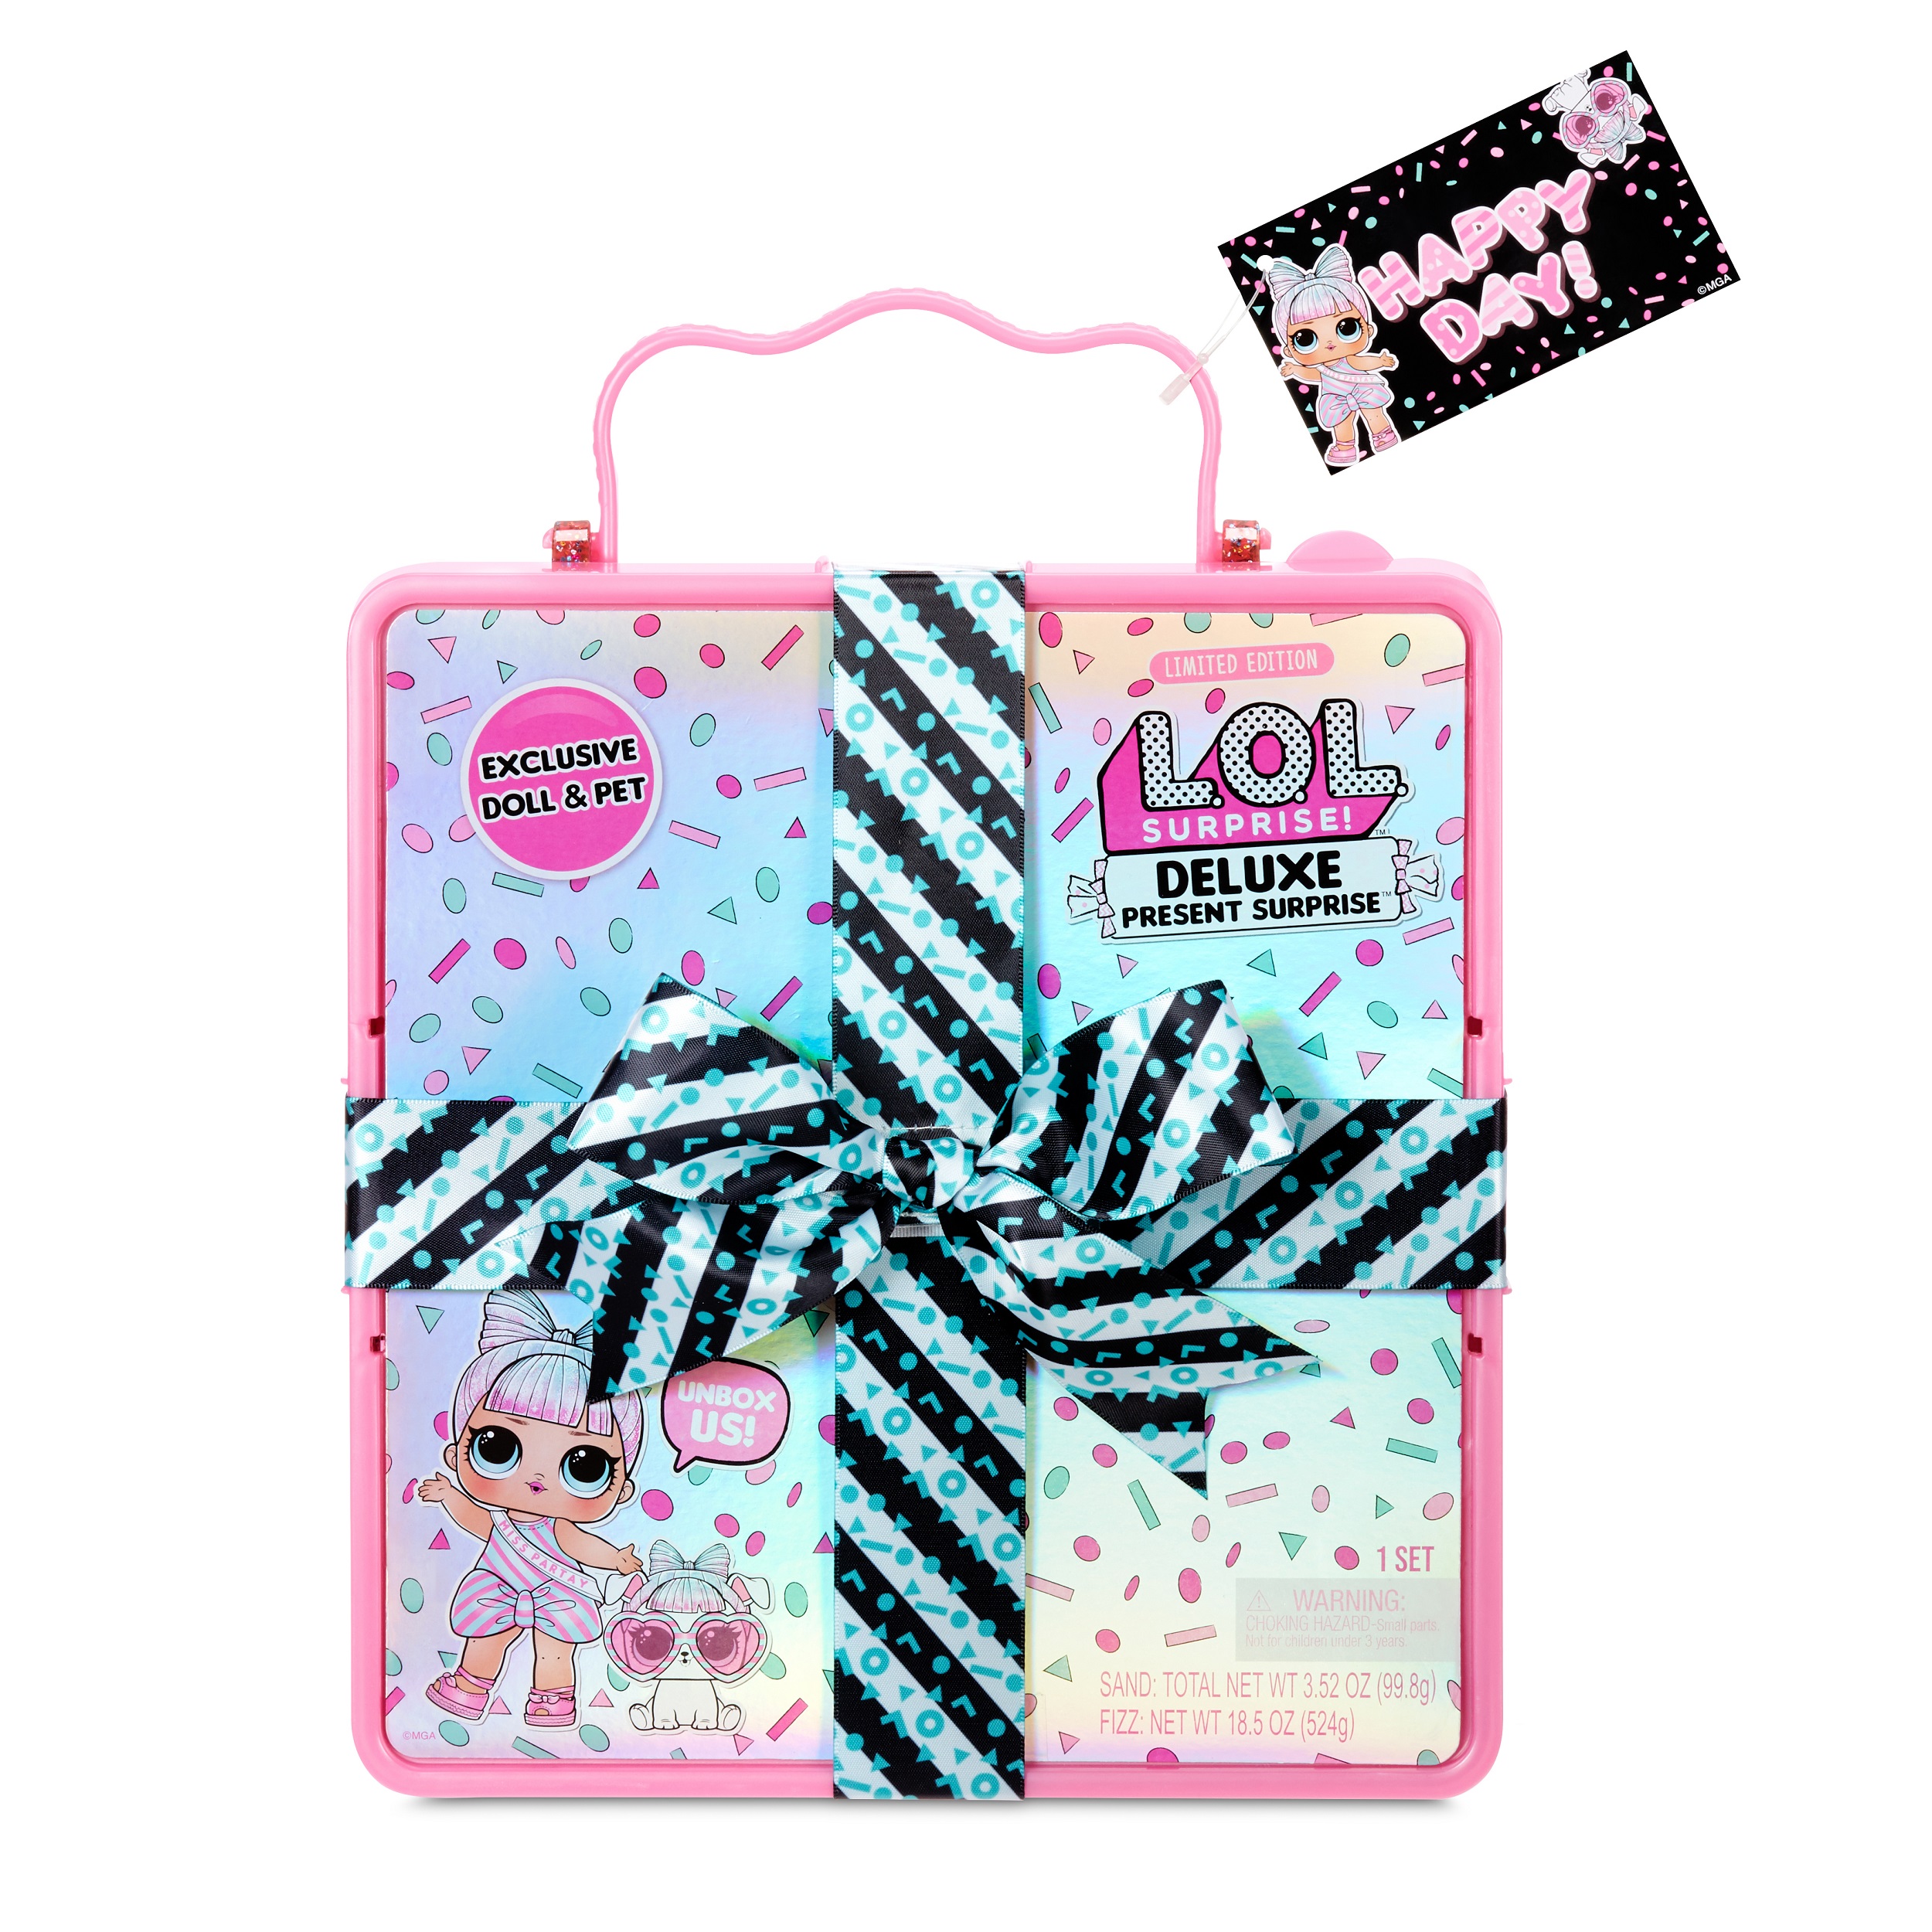 L.O.L. Surprise Deluxe Present Surprise with Miss Partay Doll and Pet/ Pink